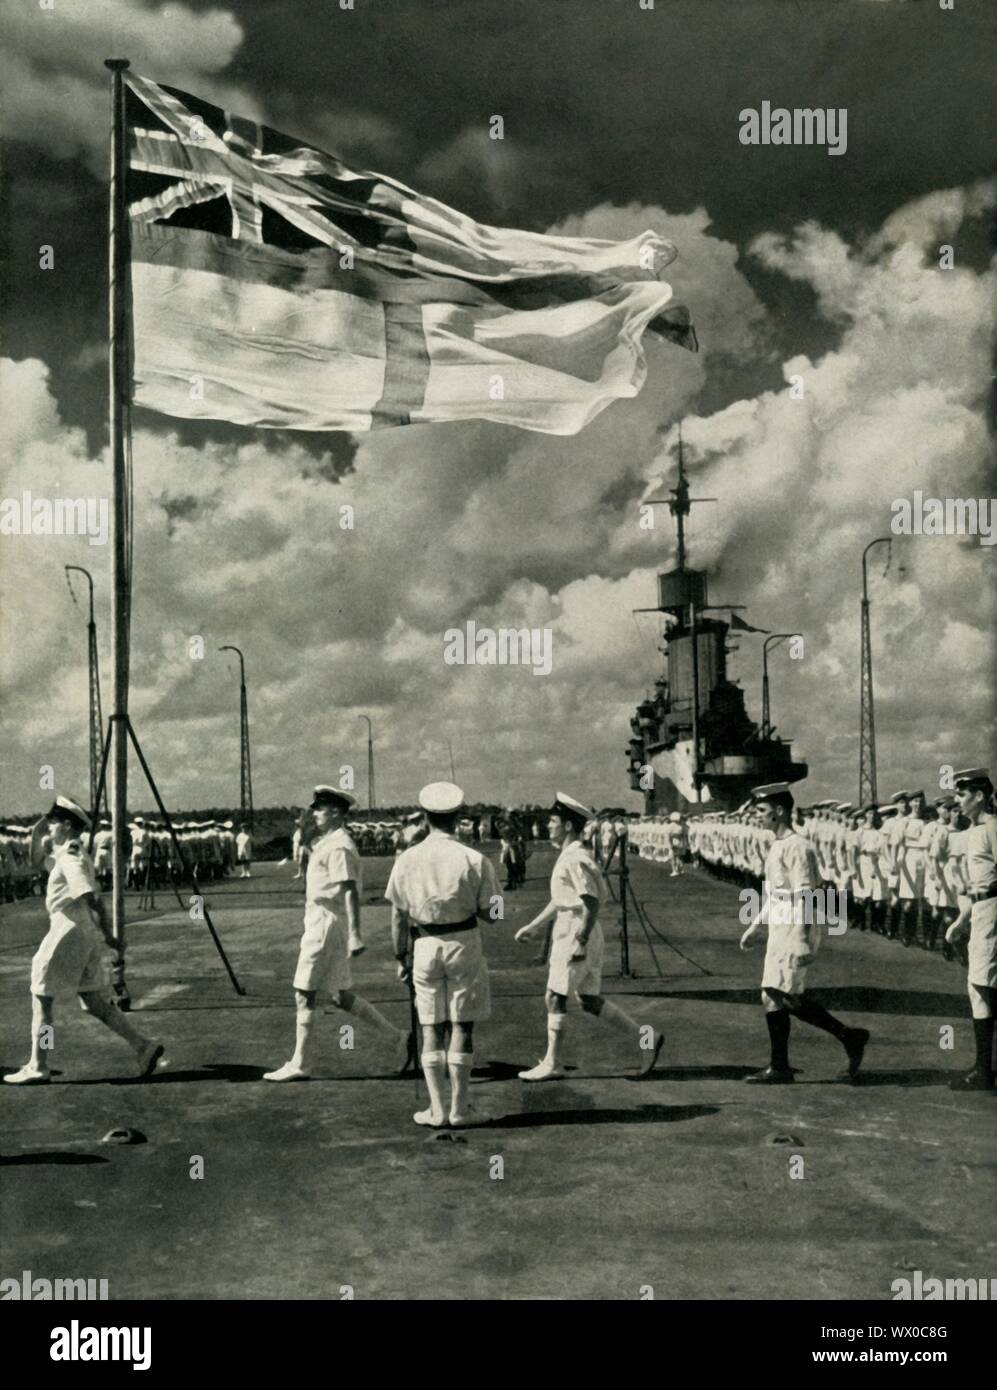 British sailors on the deck of an aircraft carrier, Second World War, c1943. The white ensign, which comprises a red St George's Cross on a white field with the Union Flag at top left, is flown on British Royal Navy ships and shore establishments. The Fleet Air Arm is the section of the Royal Navy responsible for the operation of naval aircraft. From &quot;Fleet Air Arm&quot;. [His Majesty's Stationery Office, London, 1943] Stock Photo